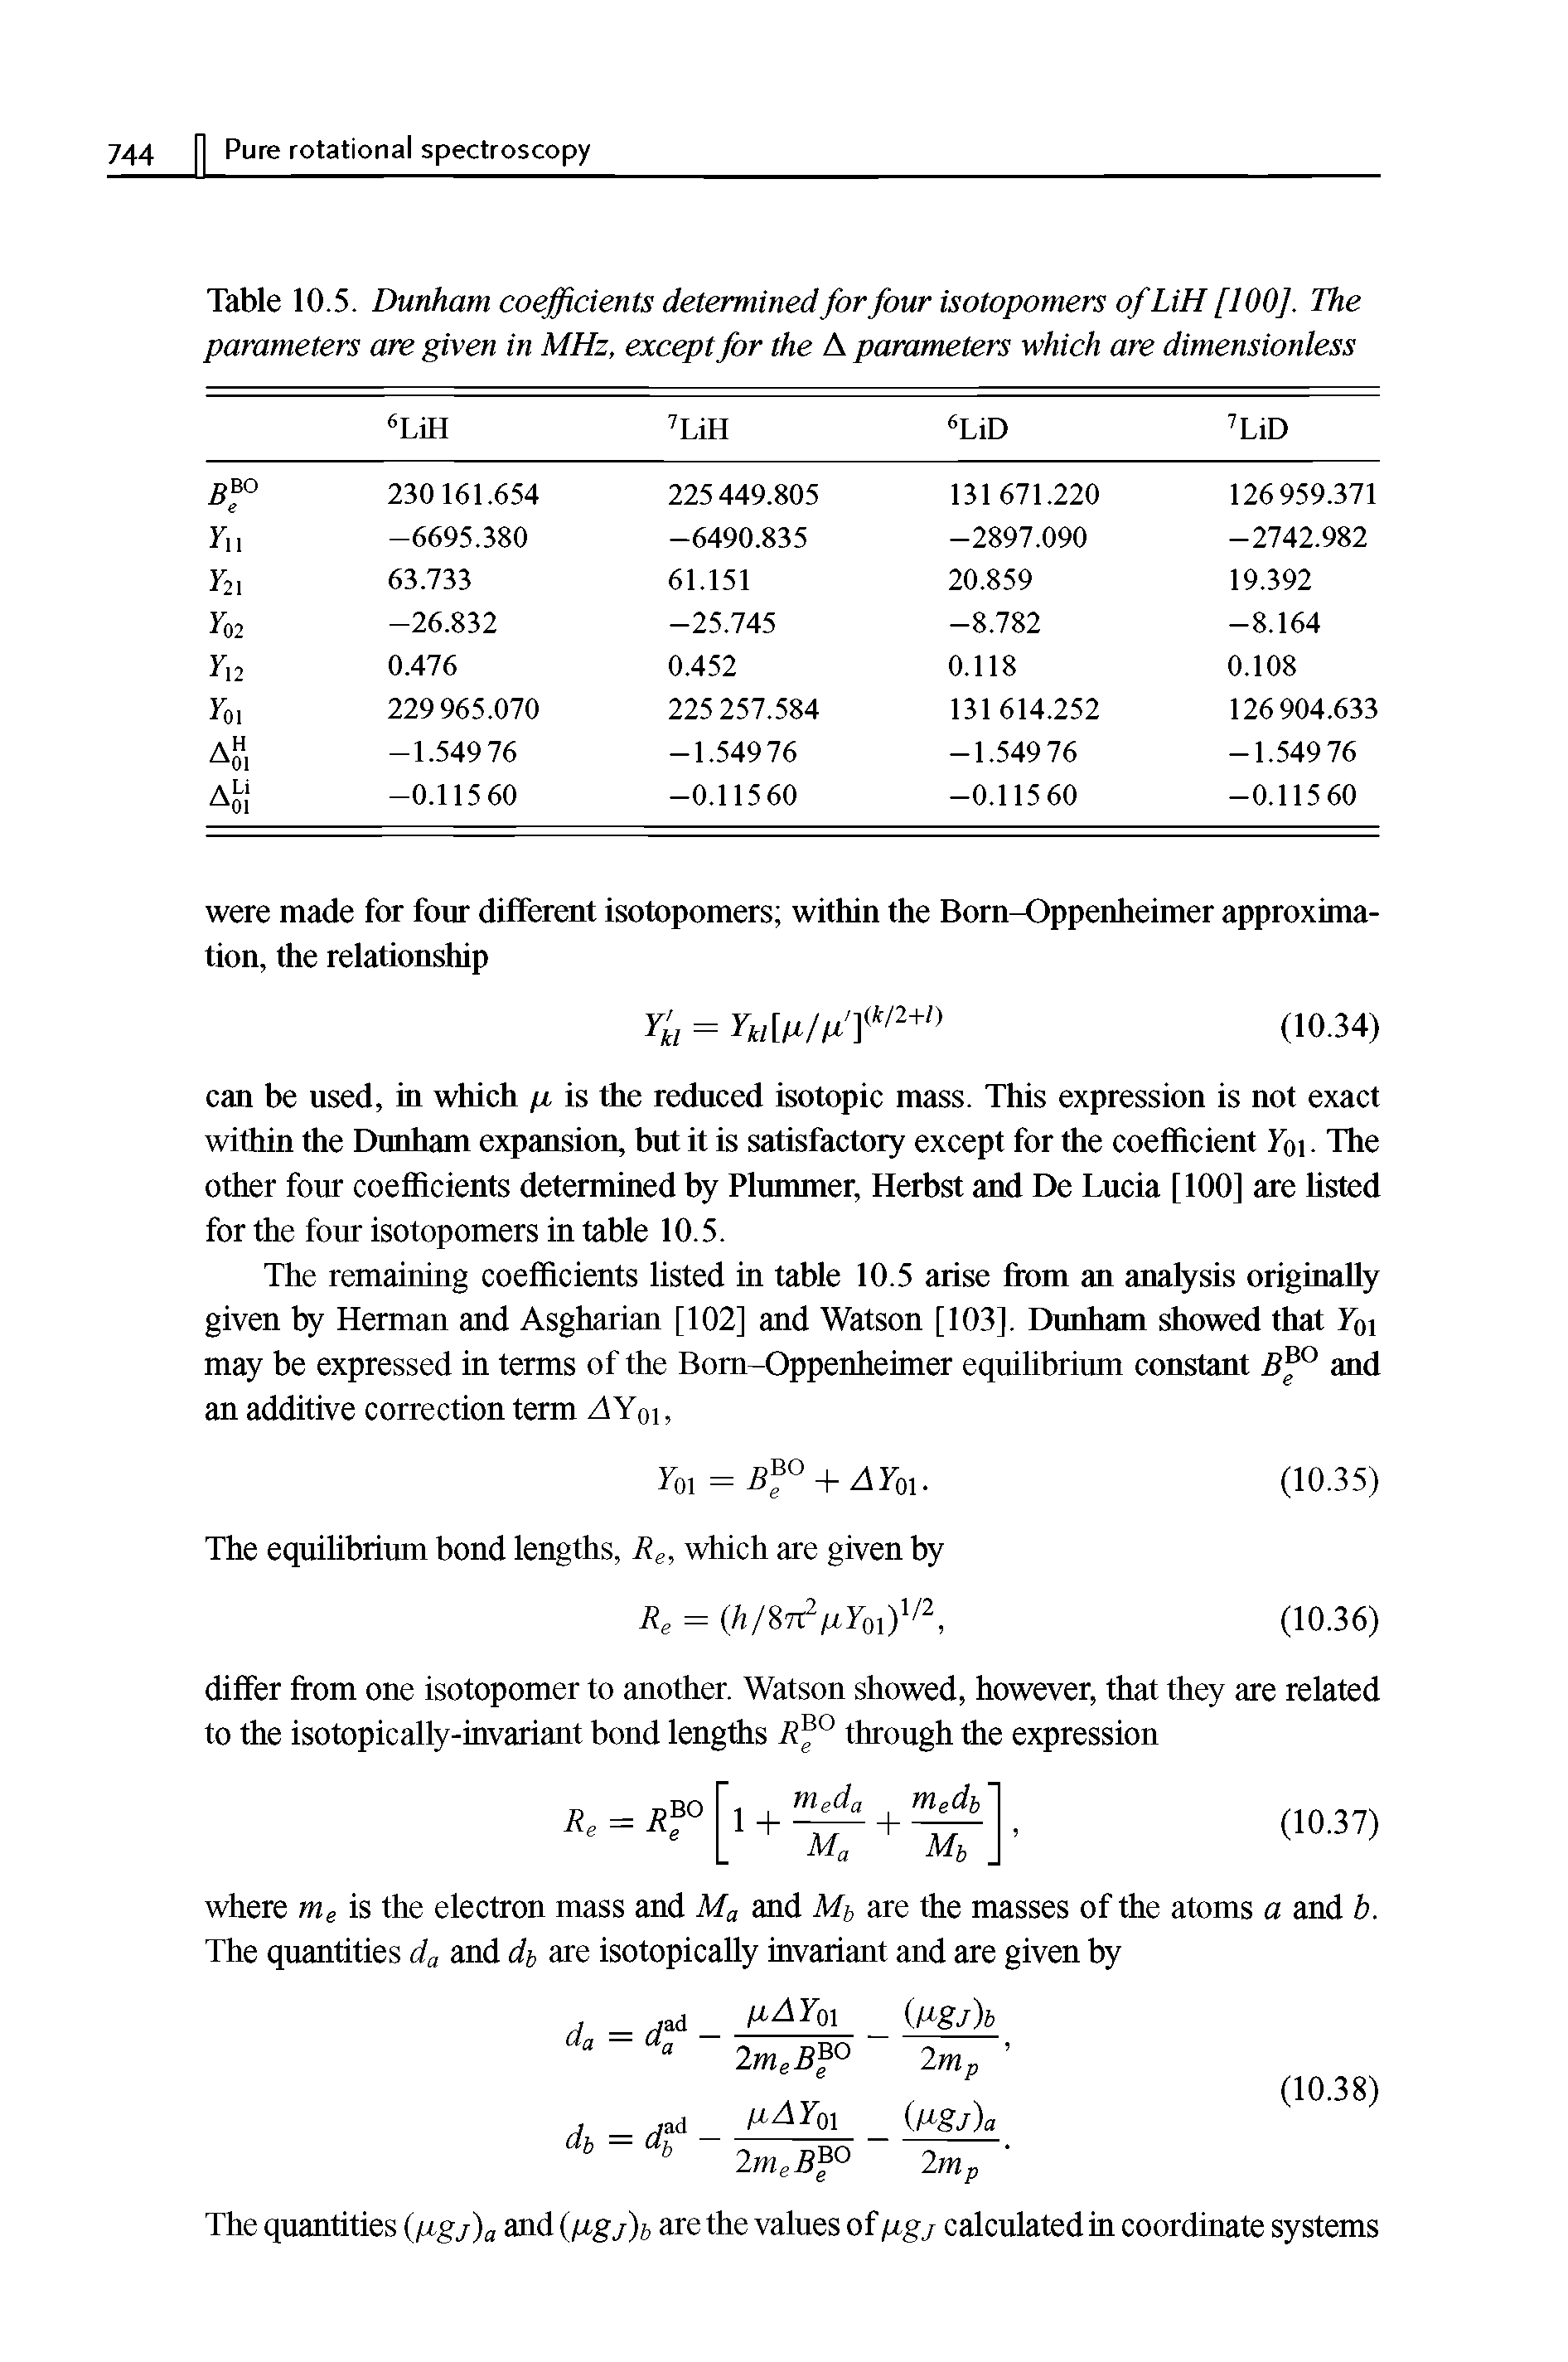 Table 10.5. Dunham coefficients determined for four isotopomers of LiH [100], The parameters are given in MHz, except for the A parameters which are dimensionless...